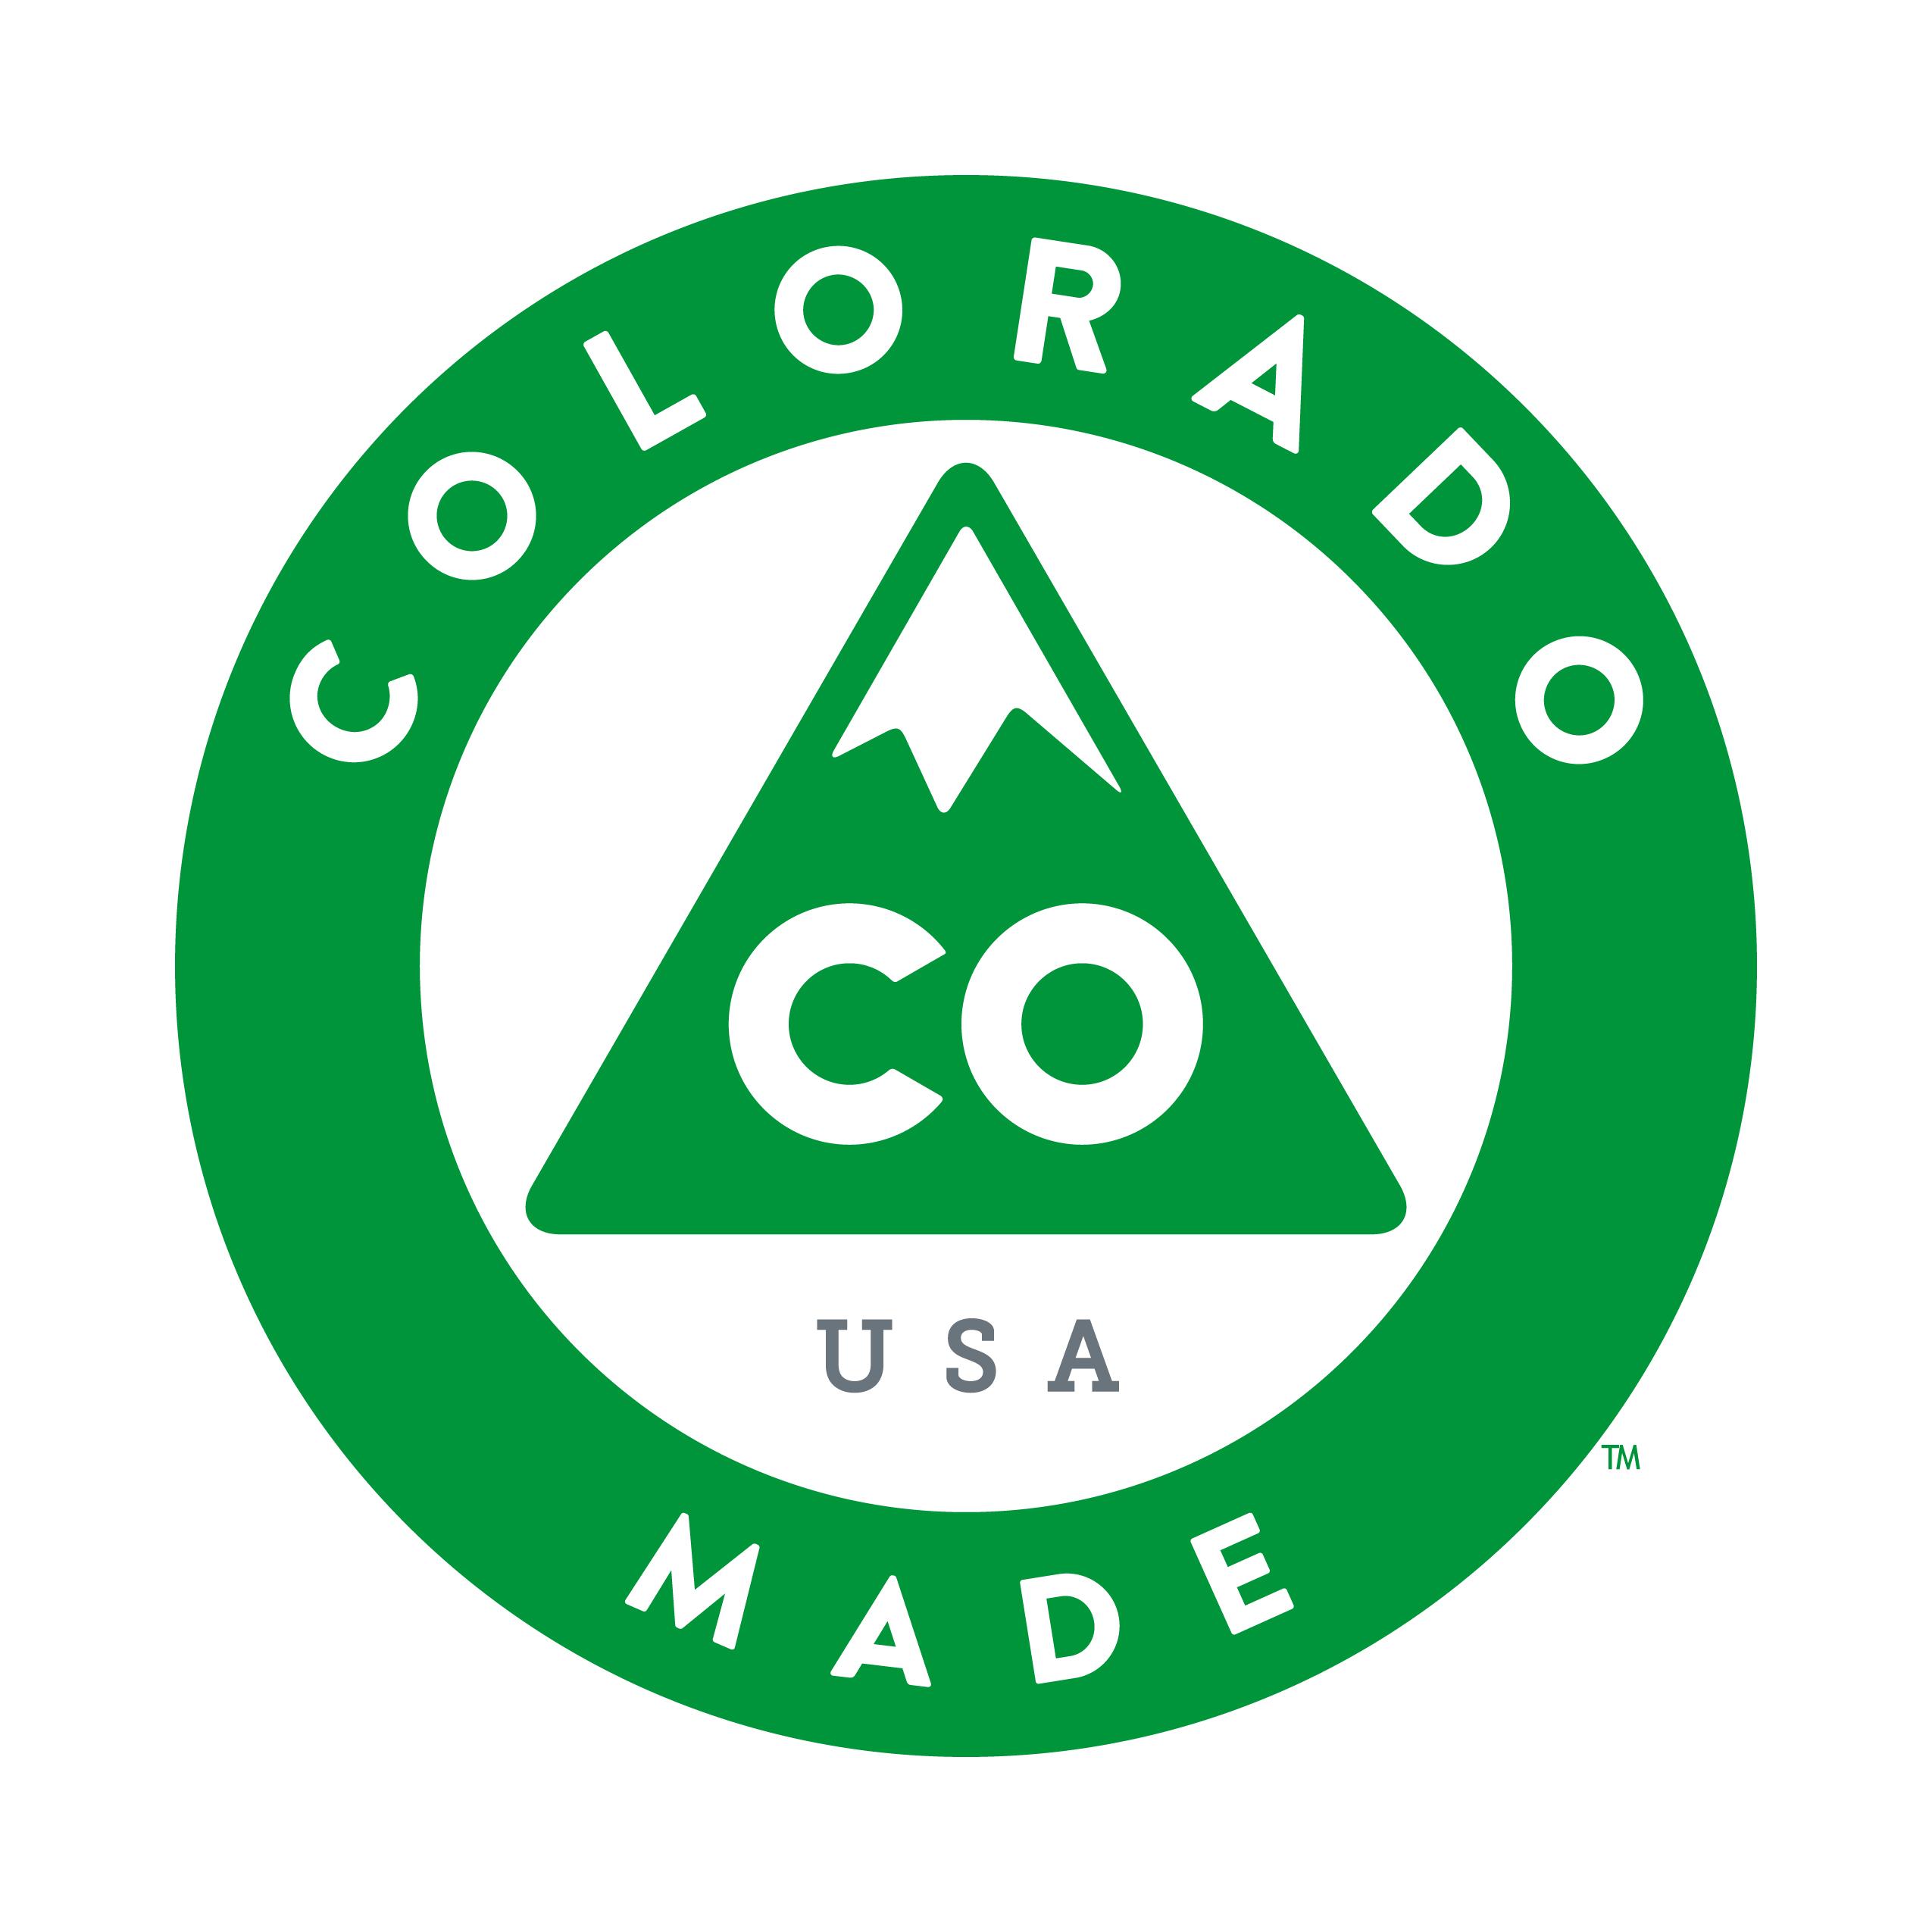 Colorado Corporate Logo - About Us about EarthRoamer as a company